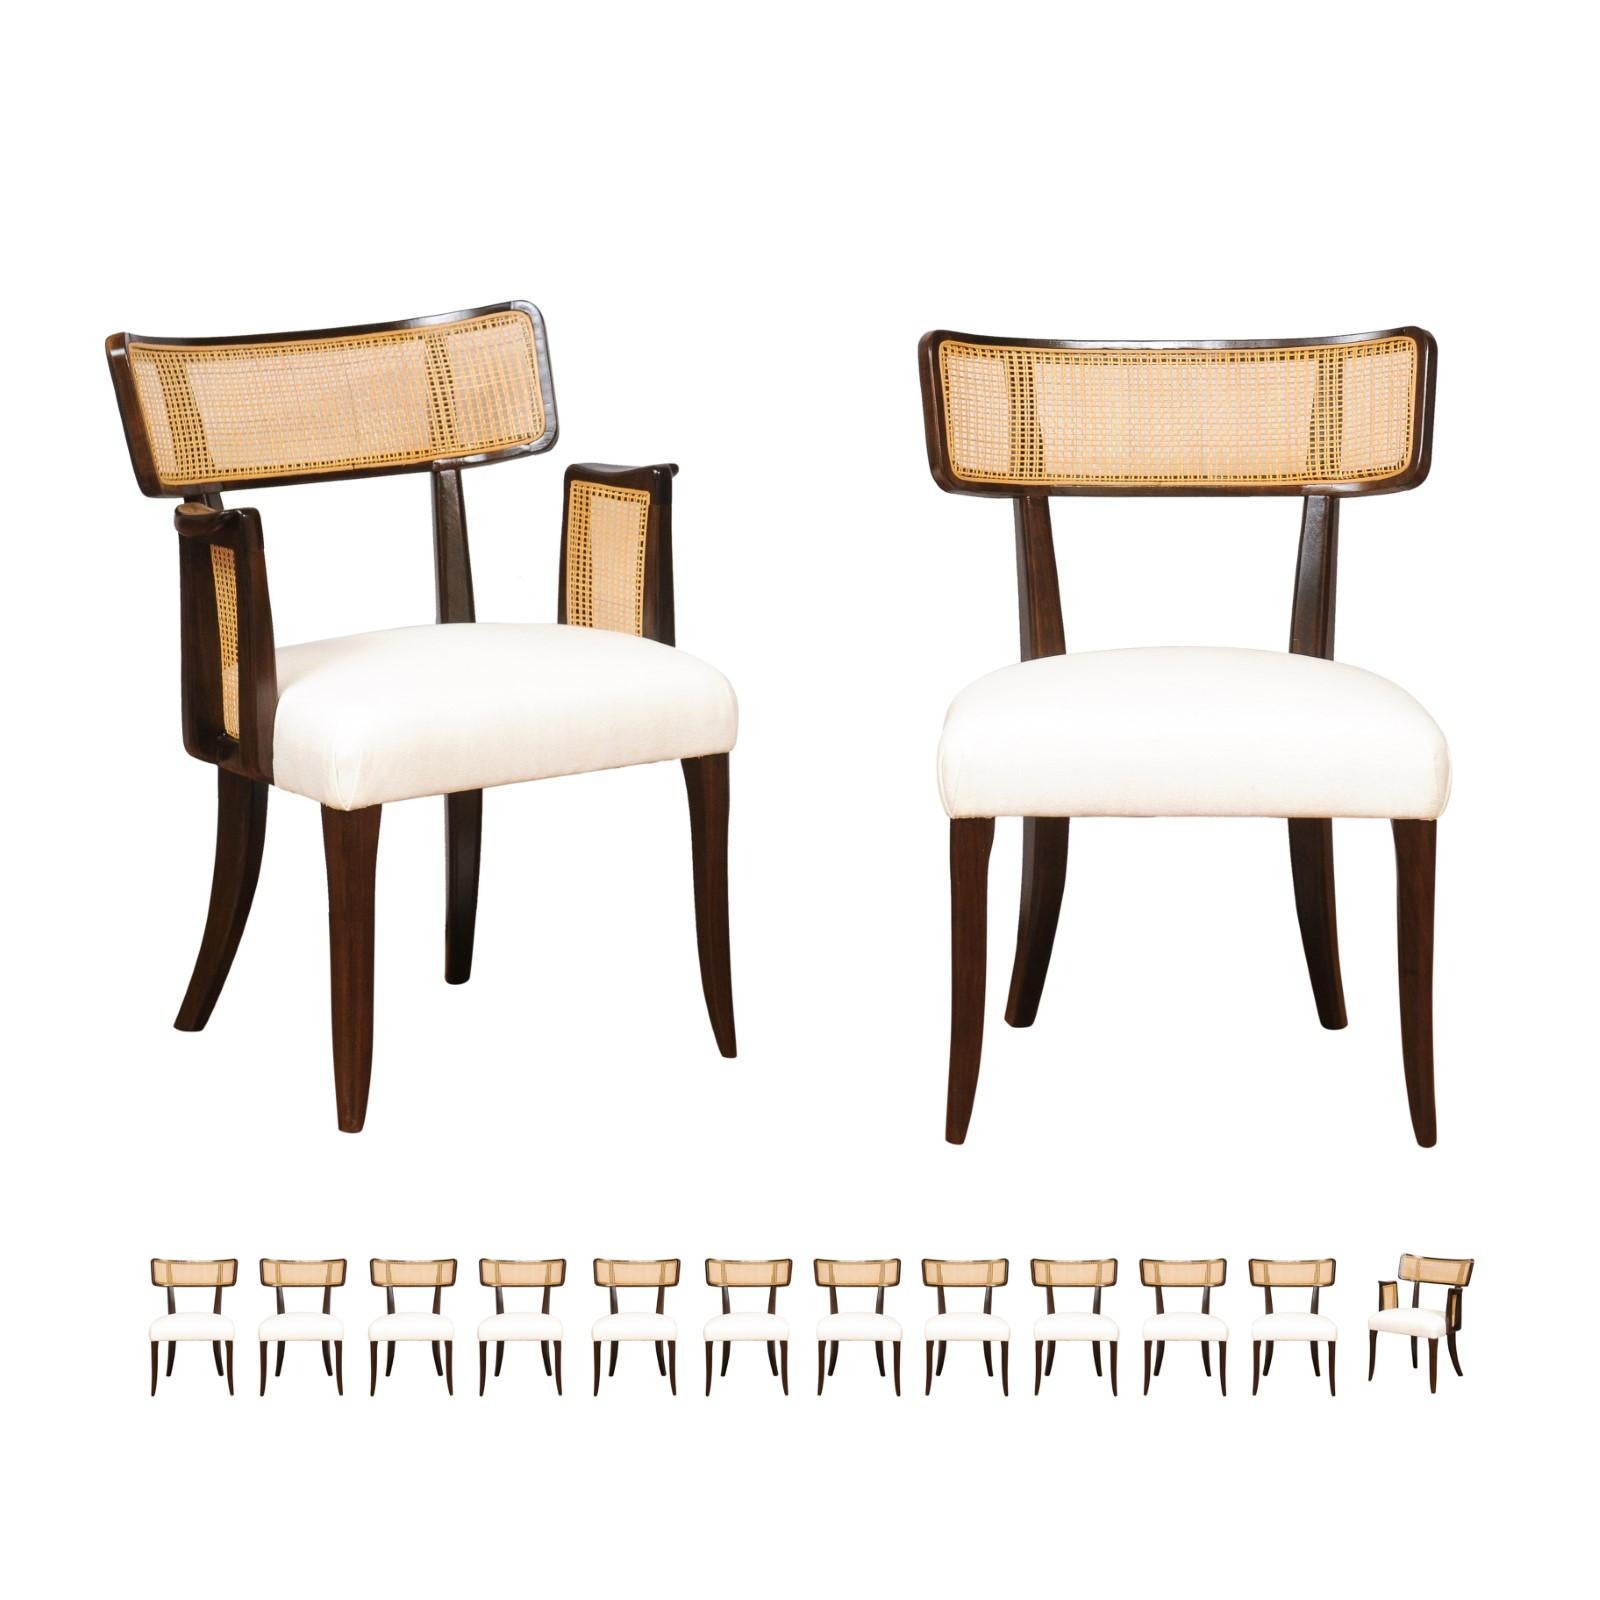 Remarkable Set of 14 Klismos Cane Dining Chairs by Edward Wormley, circa 1948 For Sale 13